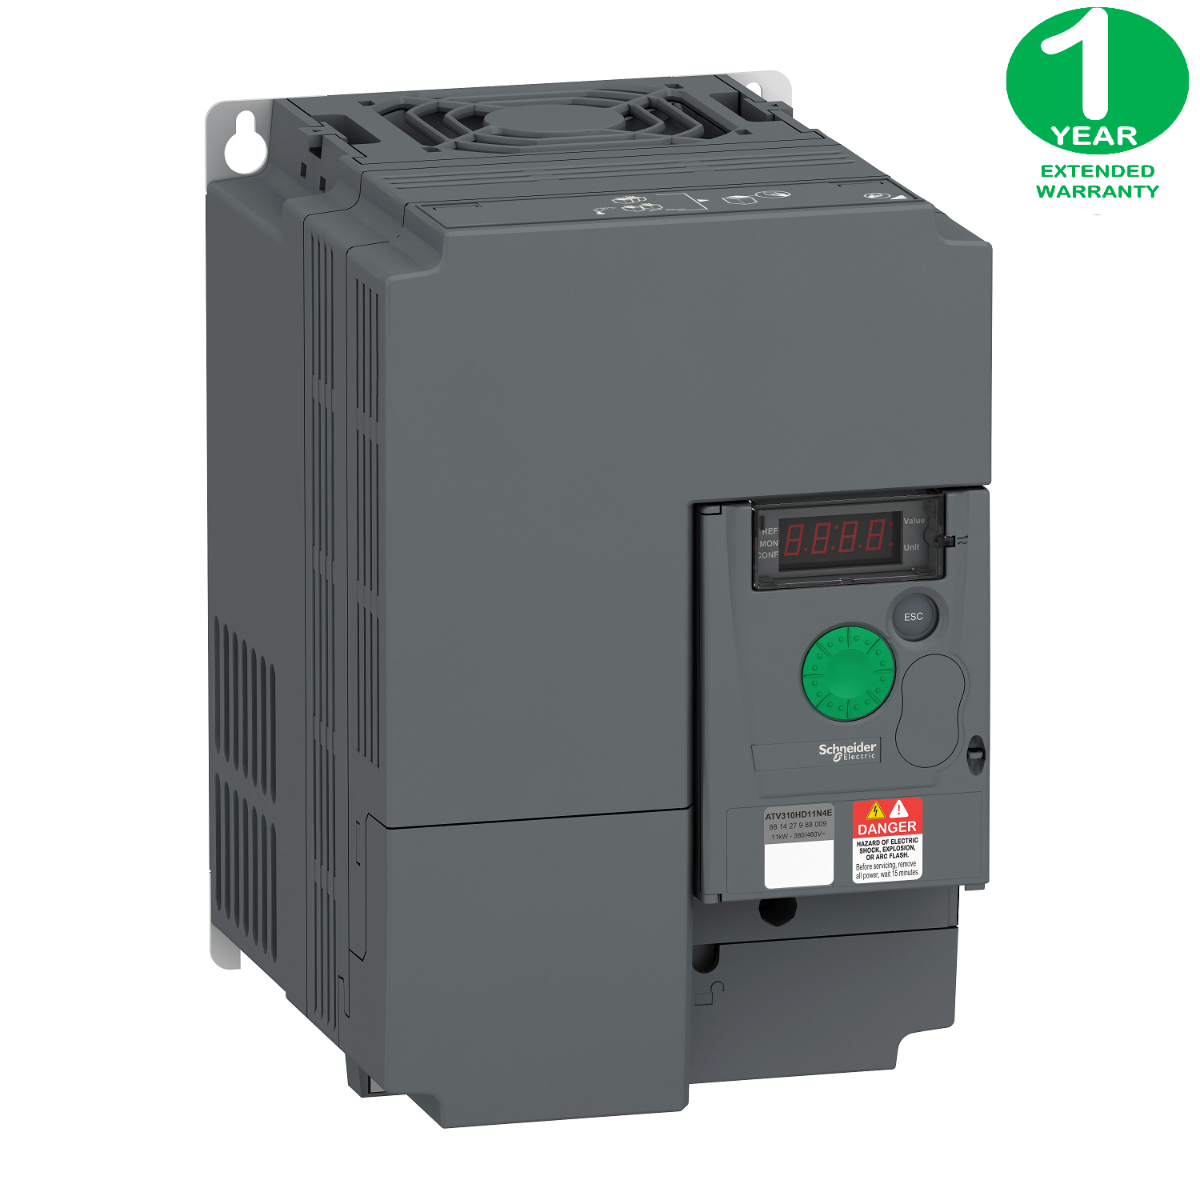 variable speed drive ATV310, 11 kW, 15 hp, 380...460 V, 3 phase, without filter + Extended Warranty 1 year